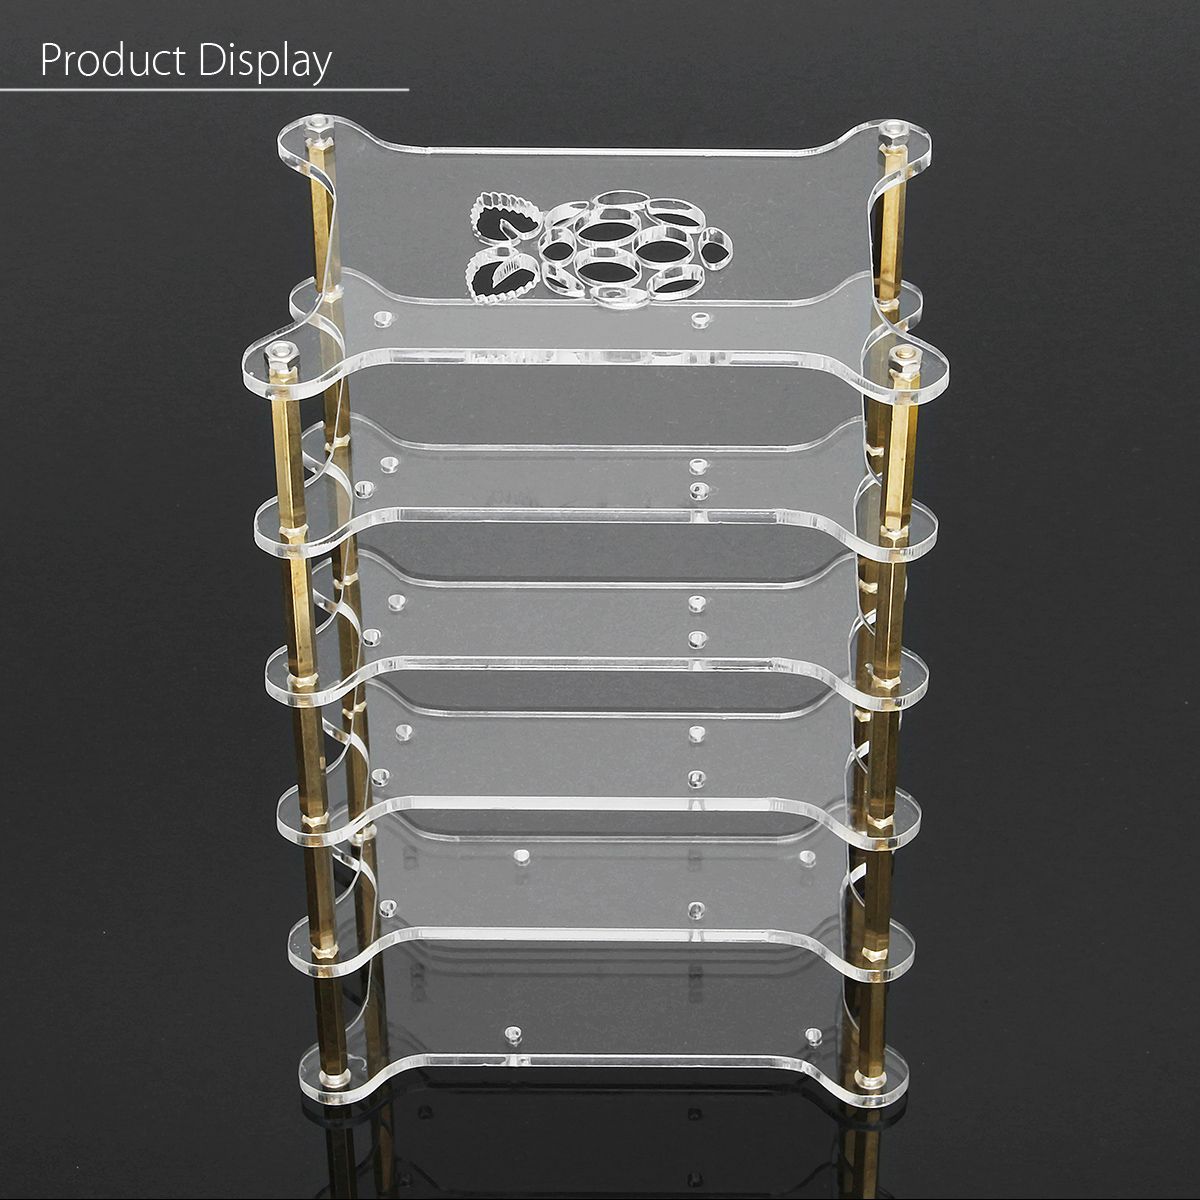 Clear-Acrylic-5-Layer-Cluster-Case-Shelf-Stack-For-Raspberry-Pi-432-B-and-B-1156903